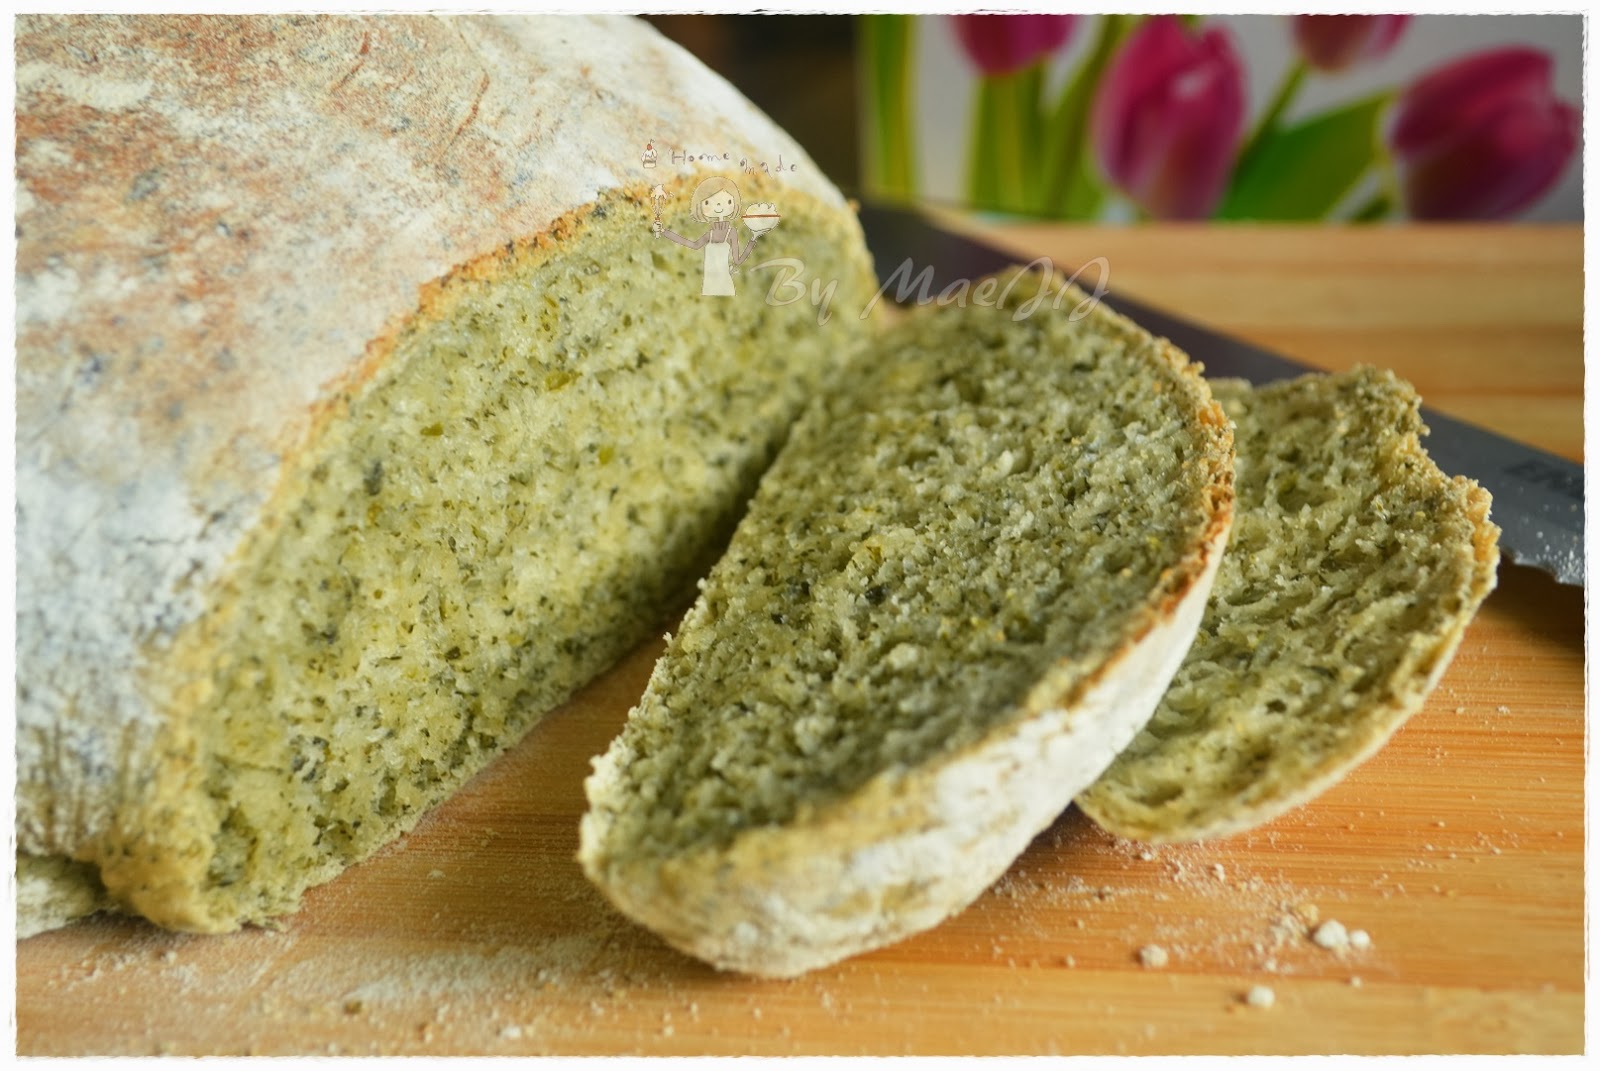 Cooking and Baking with MaeJJ: Rustic Spinach Bread